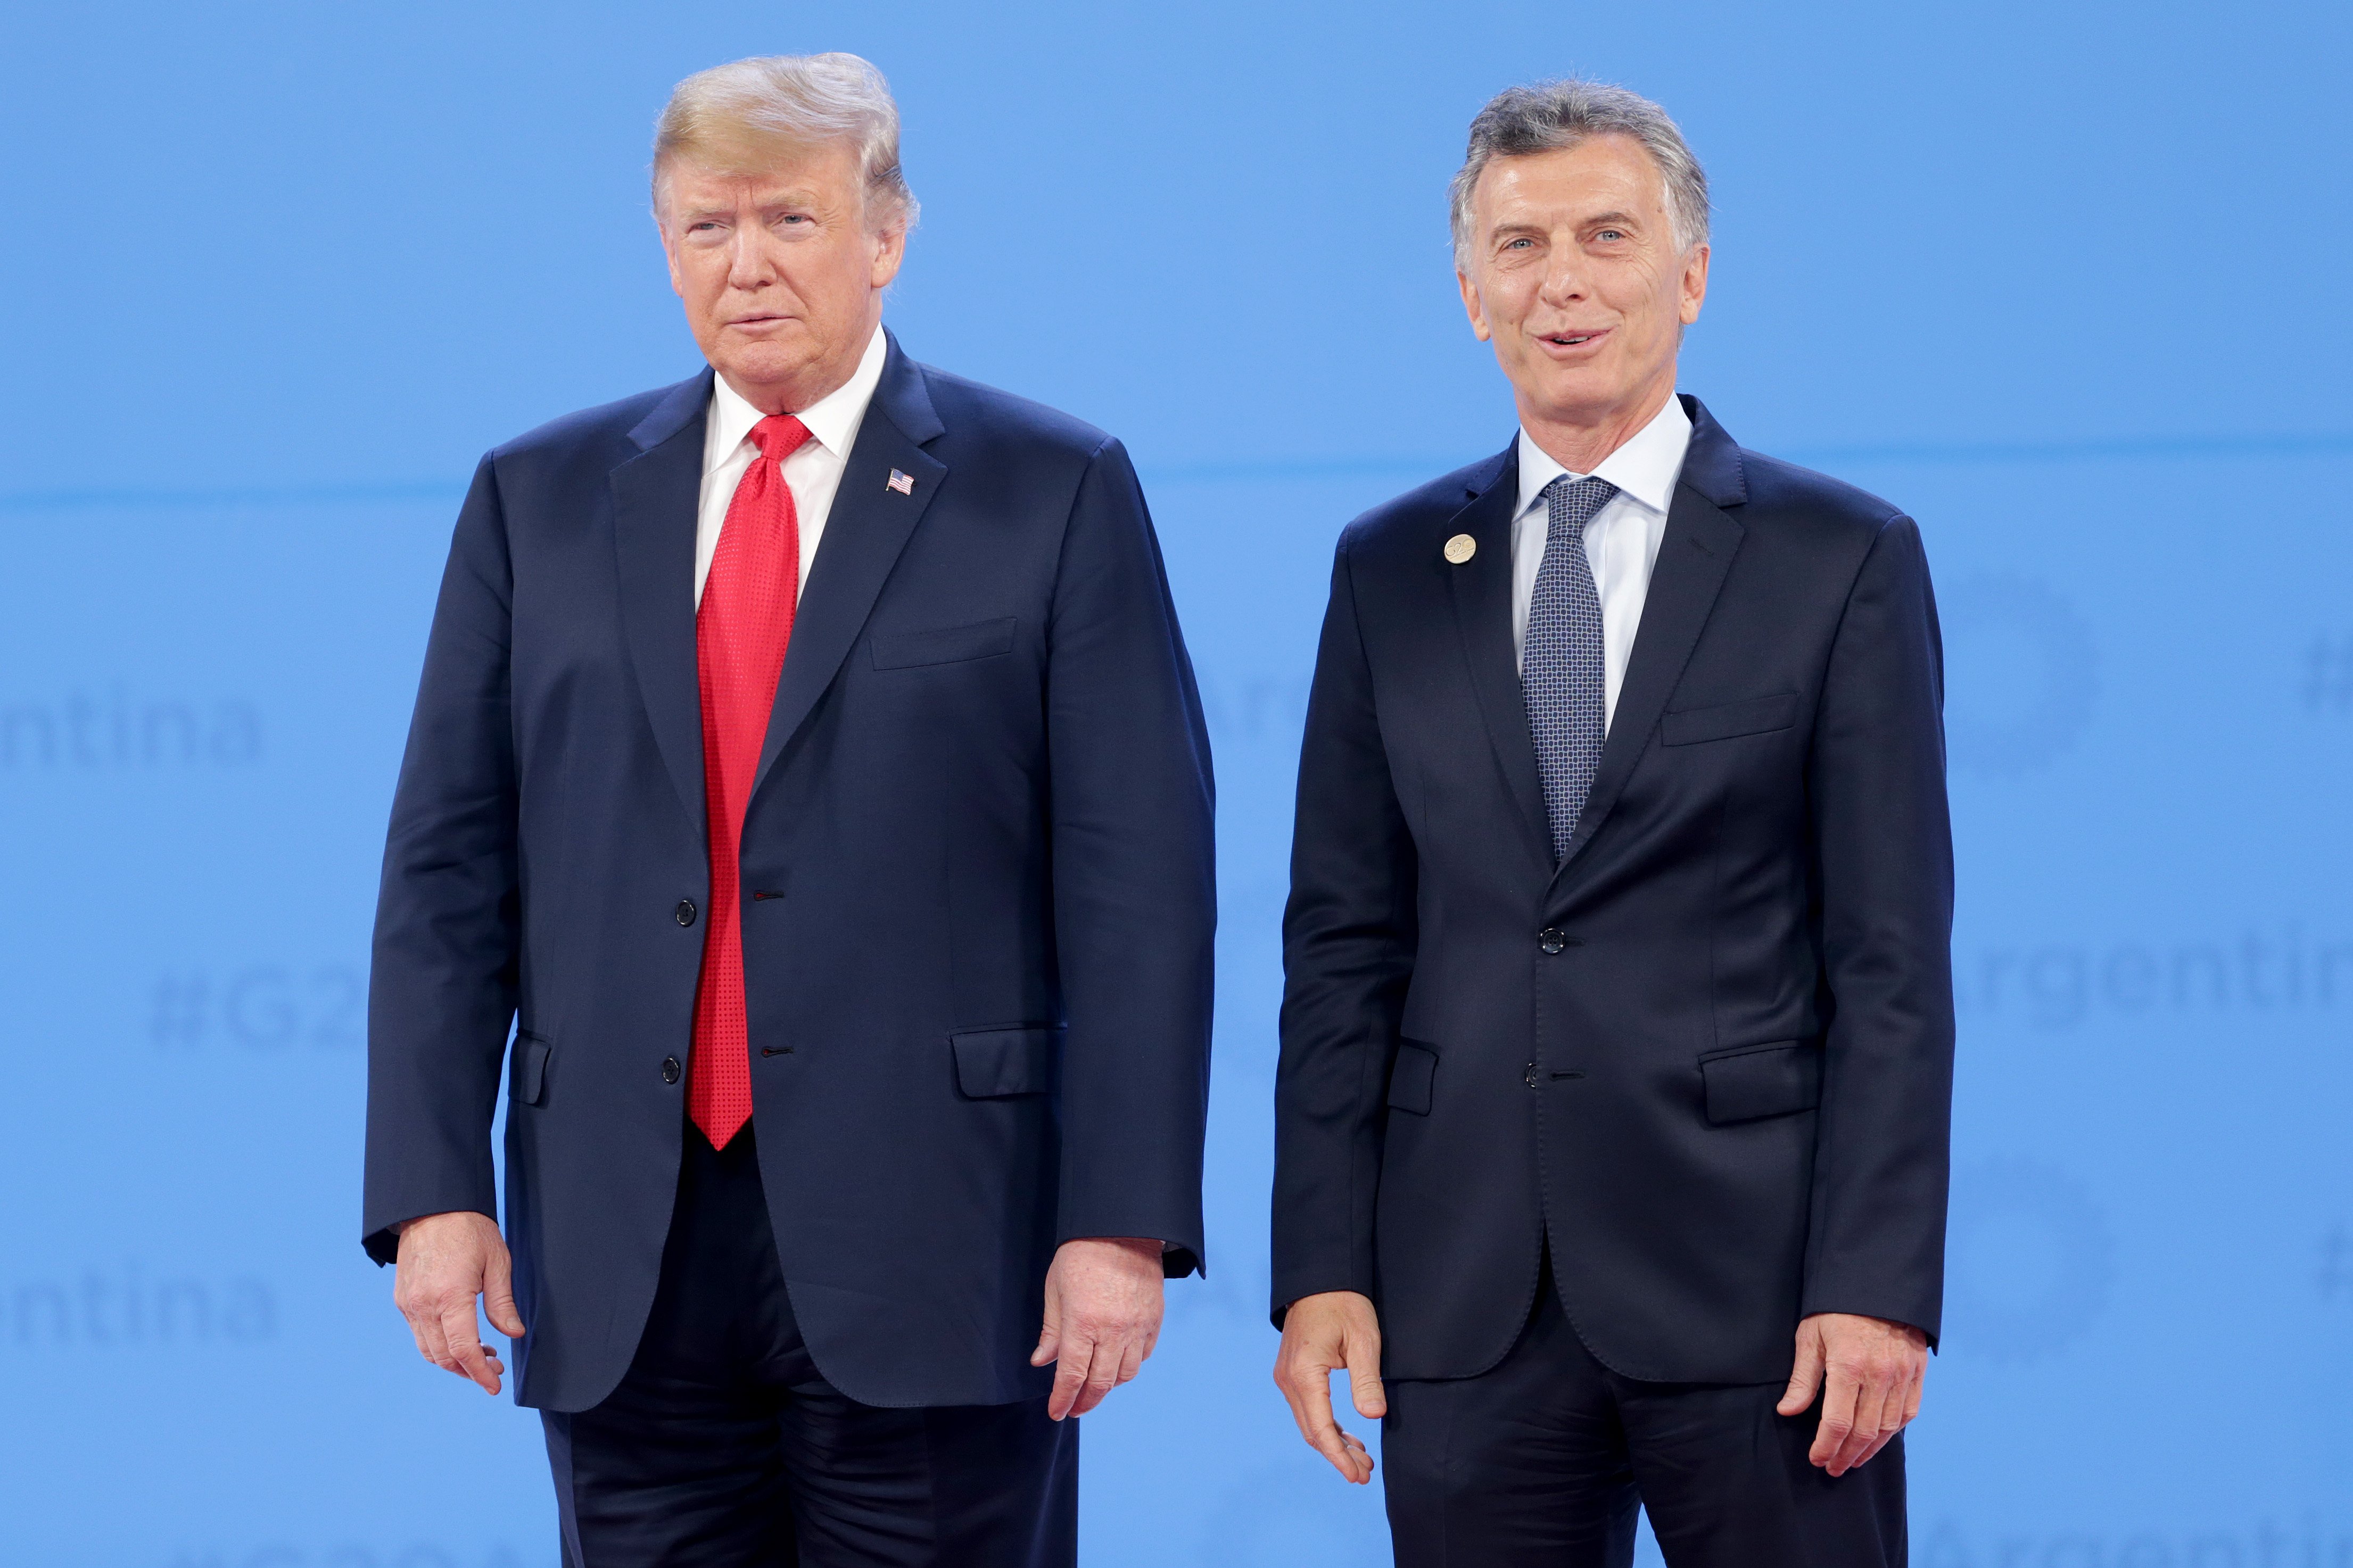 U.S. President Donald Trump and President of Argentina Mauricio Macri at the 2018 G20 Summit in Buenos Aires | Photo: Getty Images